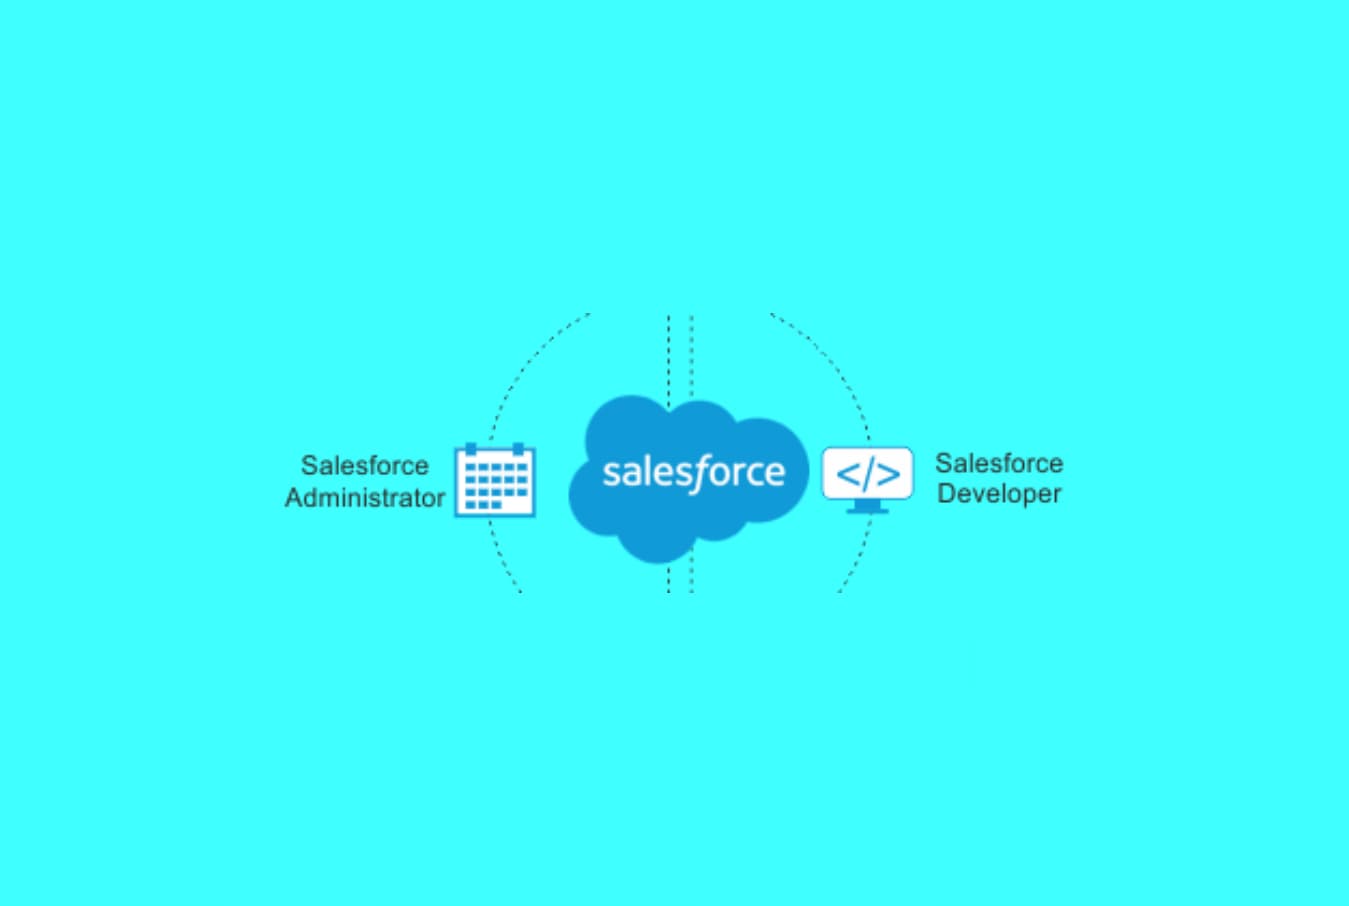 How to Find Success with the Salesforce Admin Exam